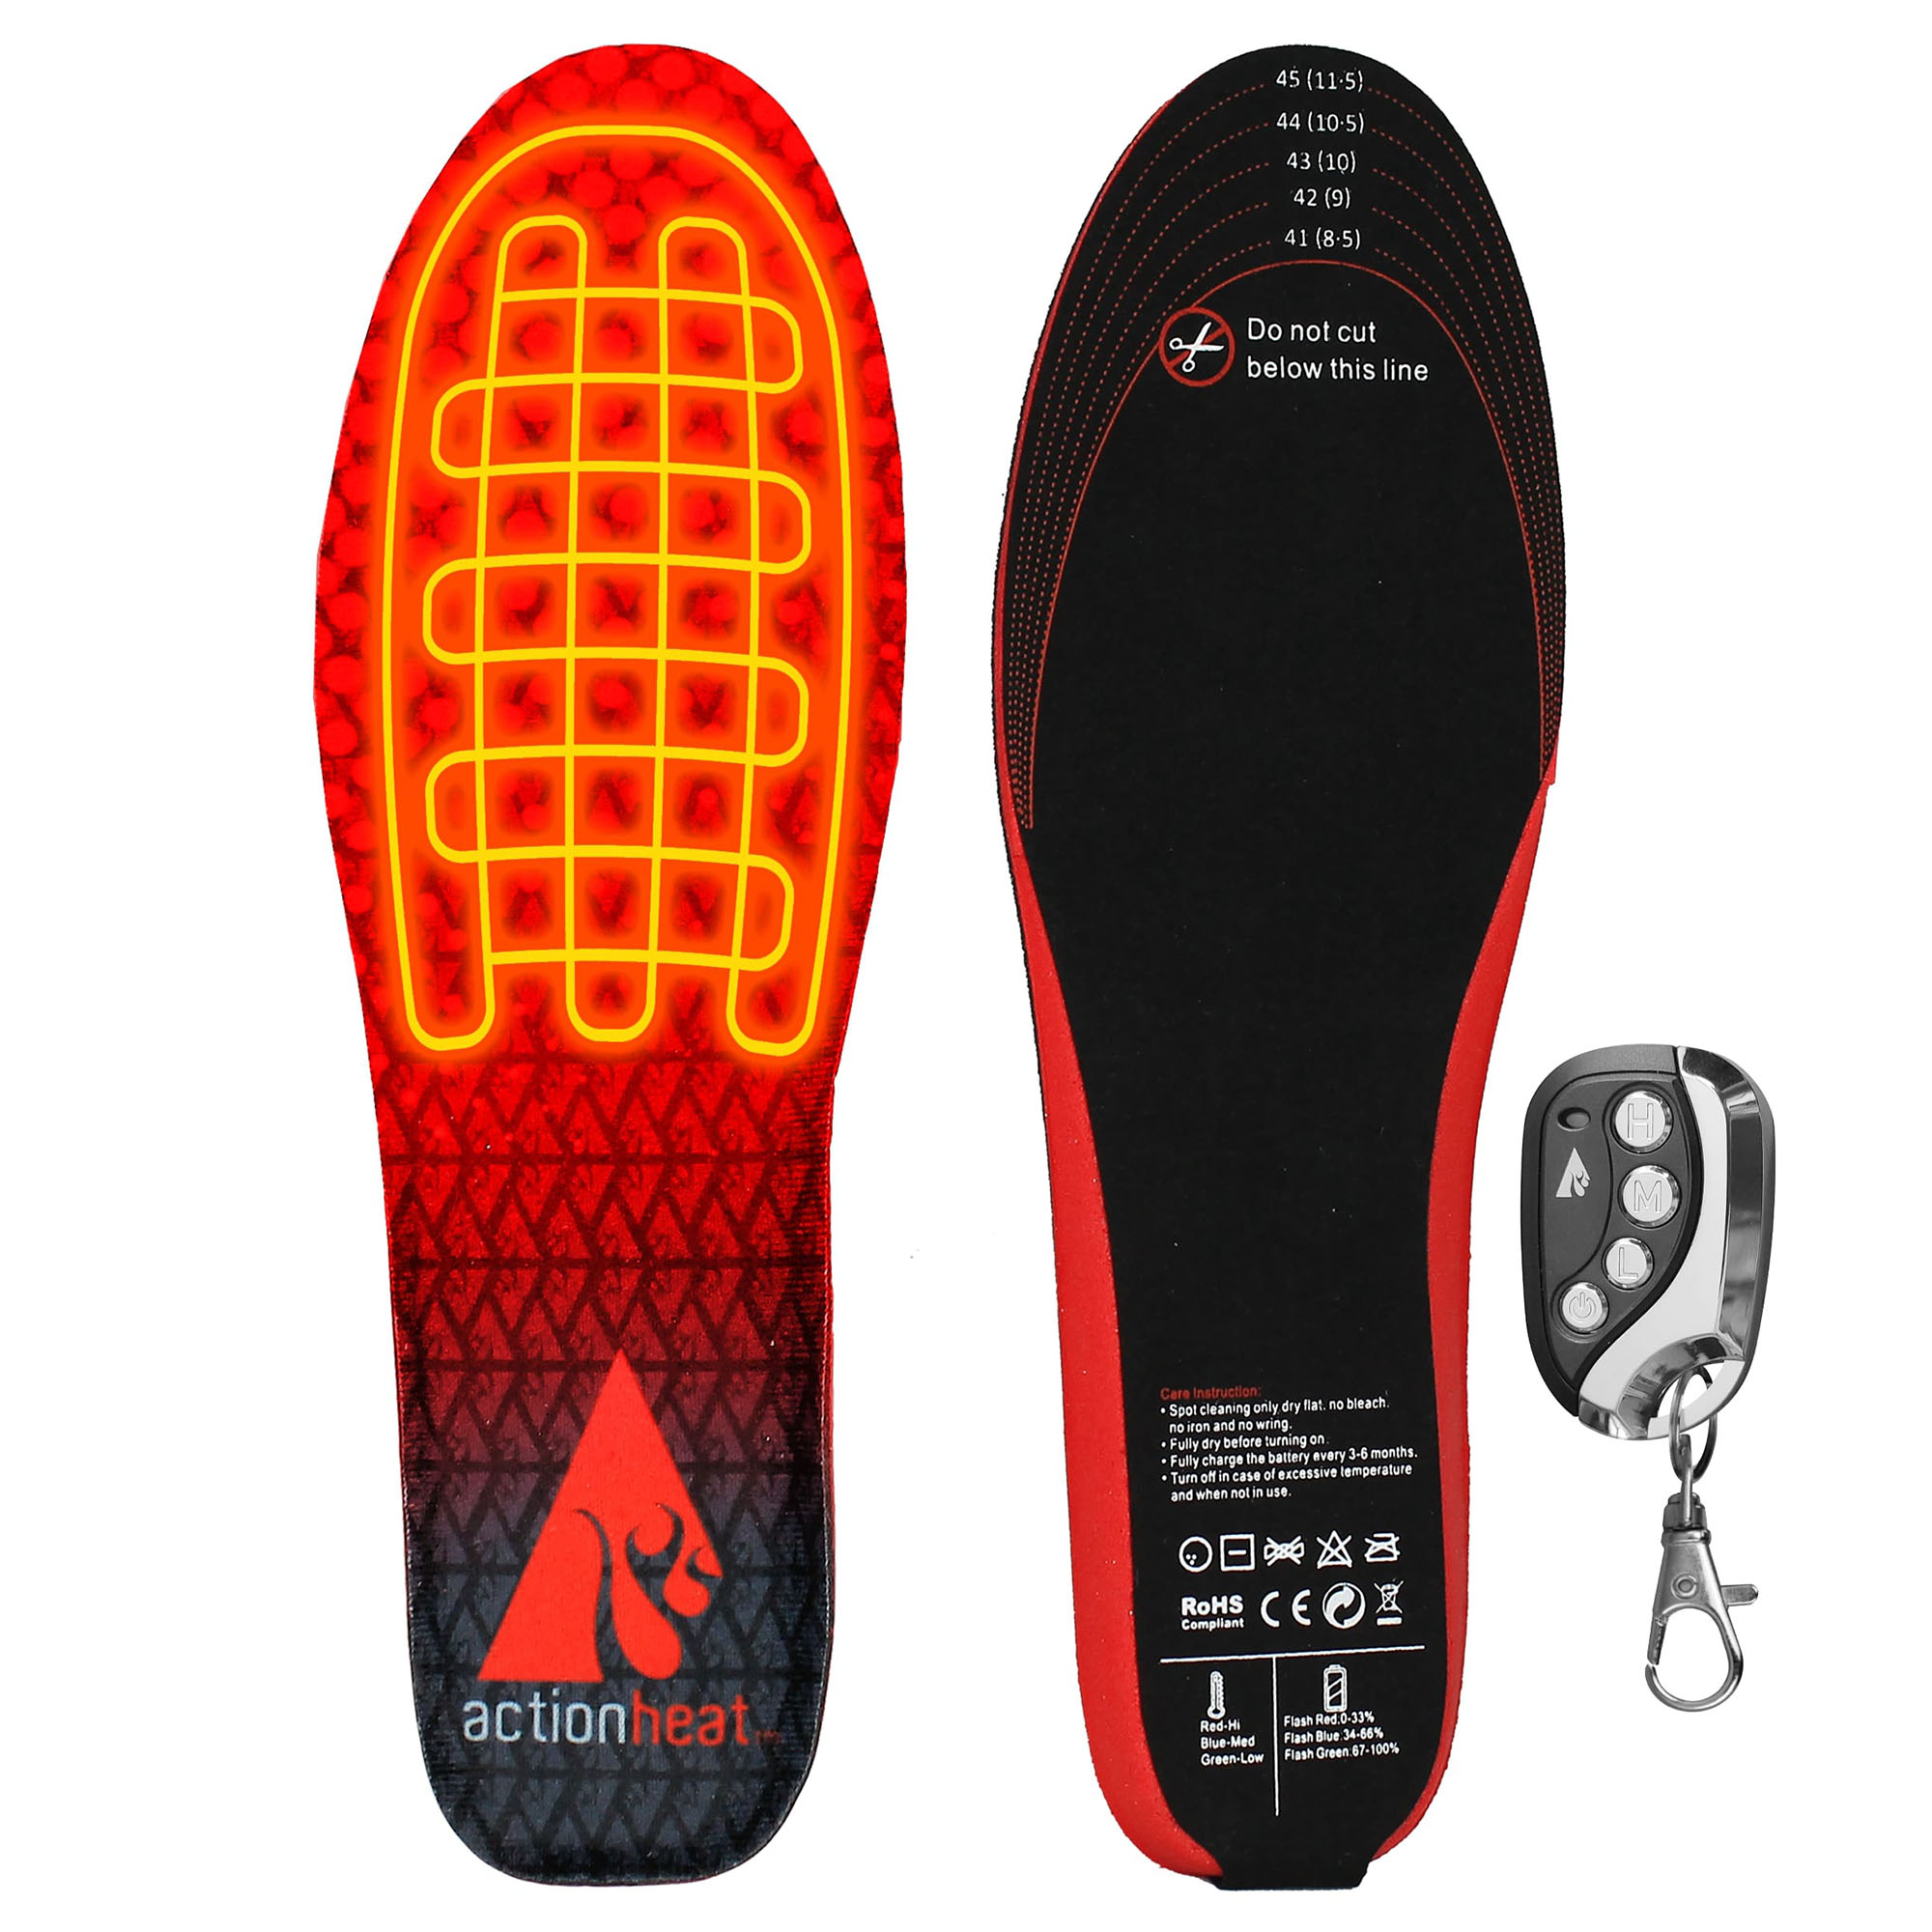 Outdoor Sports Heating Inserts Winter Warm USB Heated Shoe Insoles